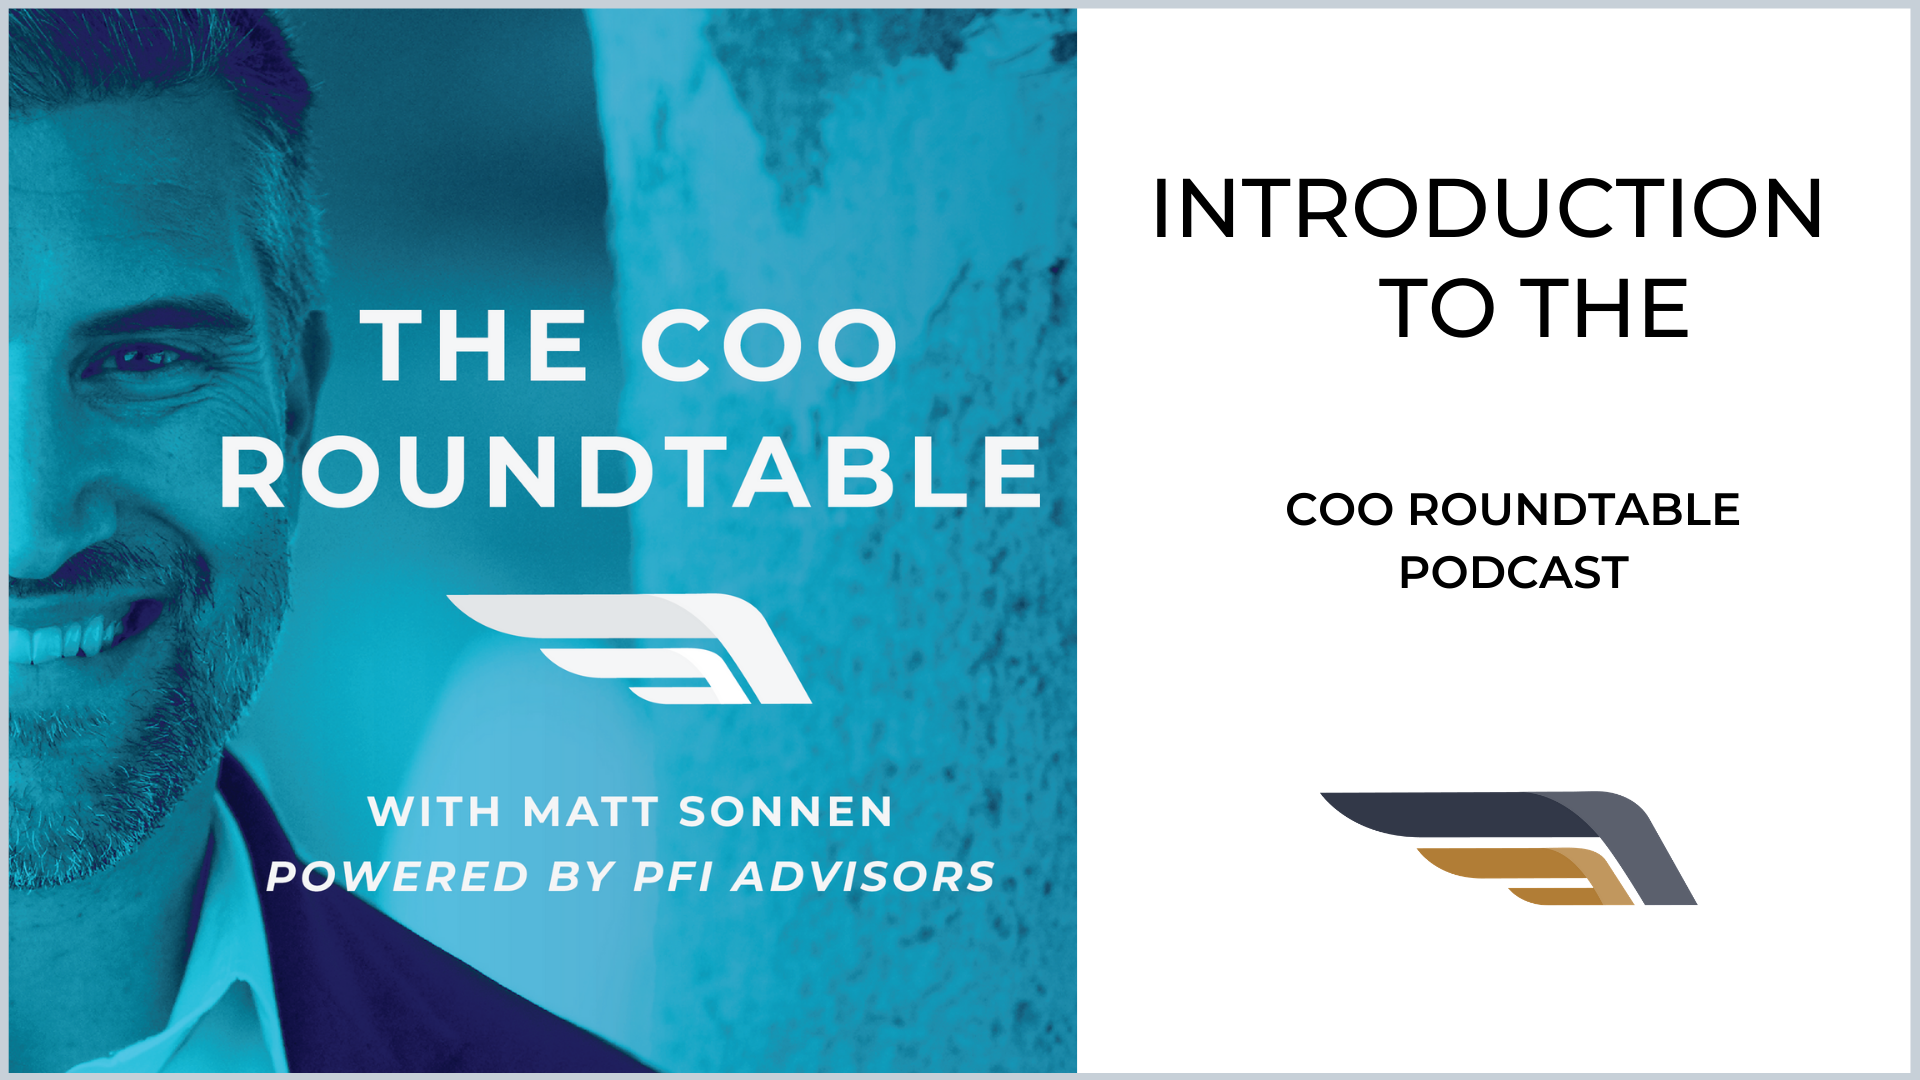 Introducing The COO Roundtable Podcast